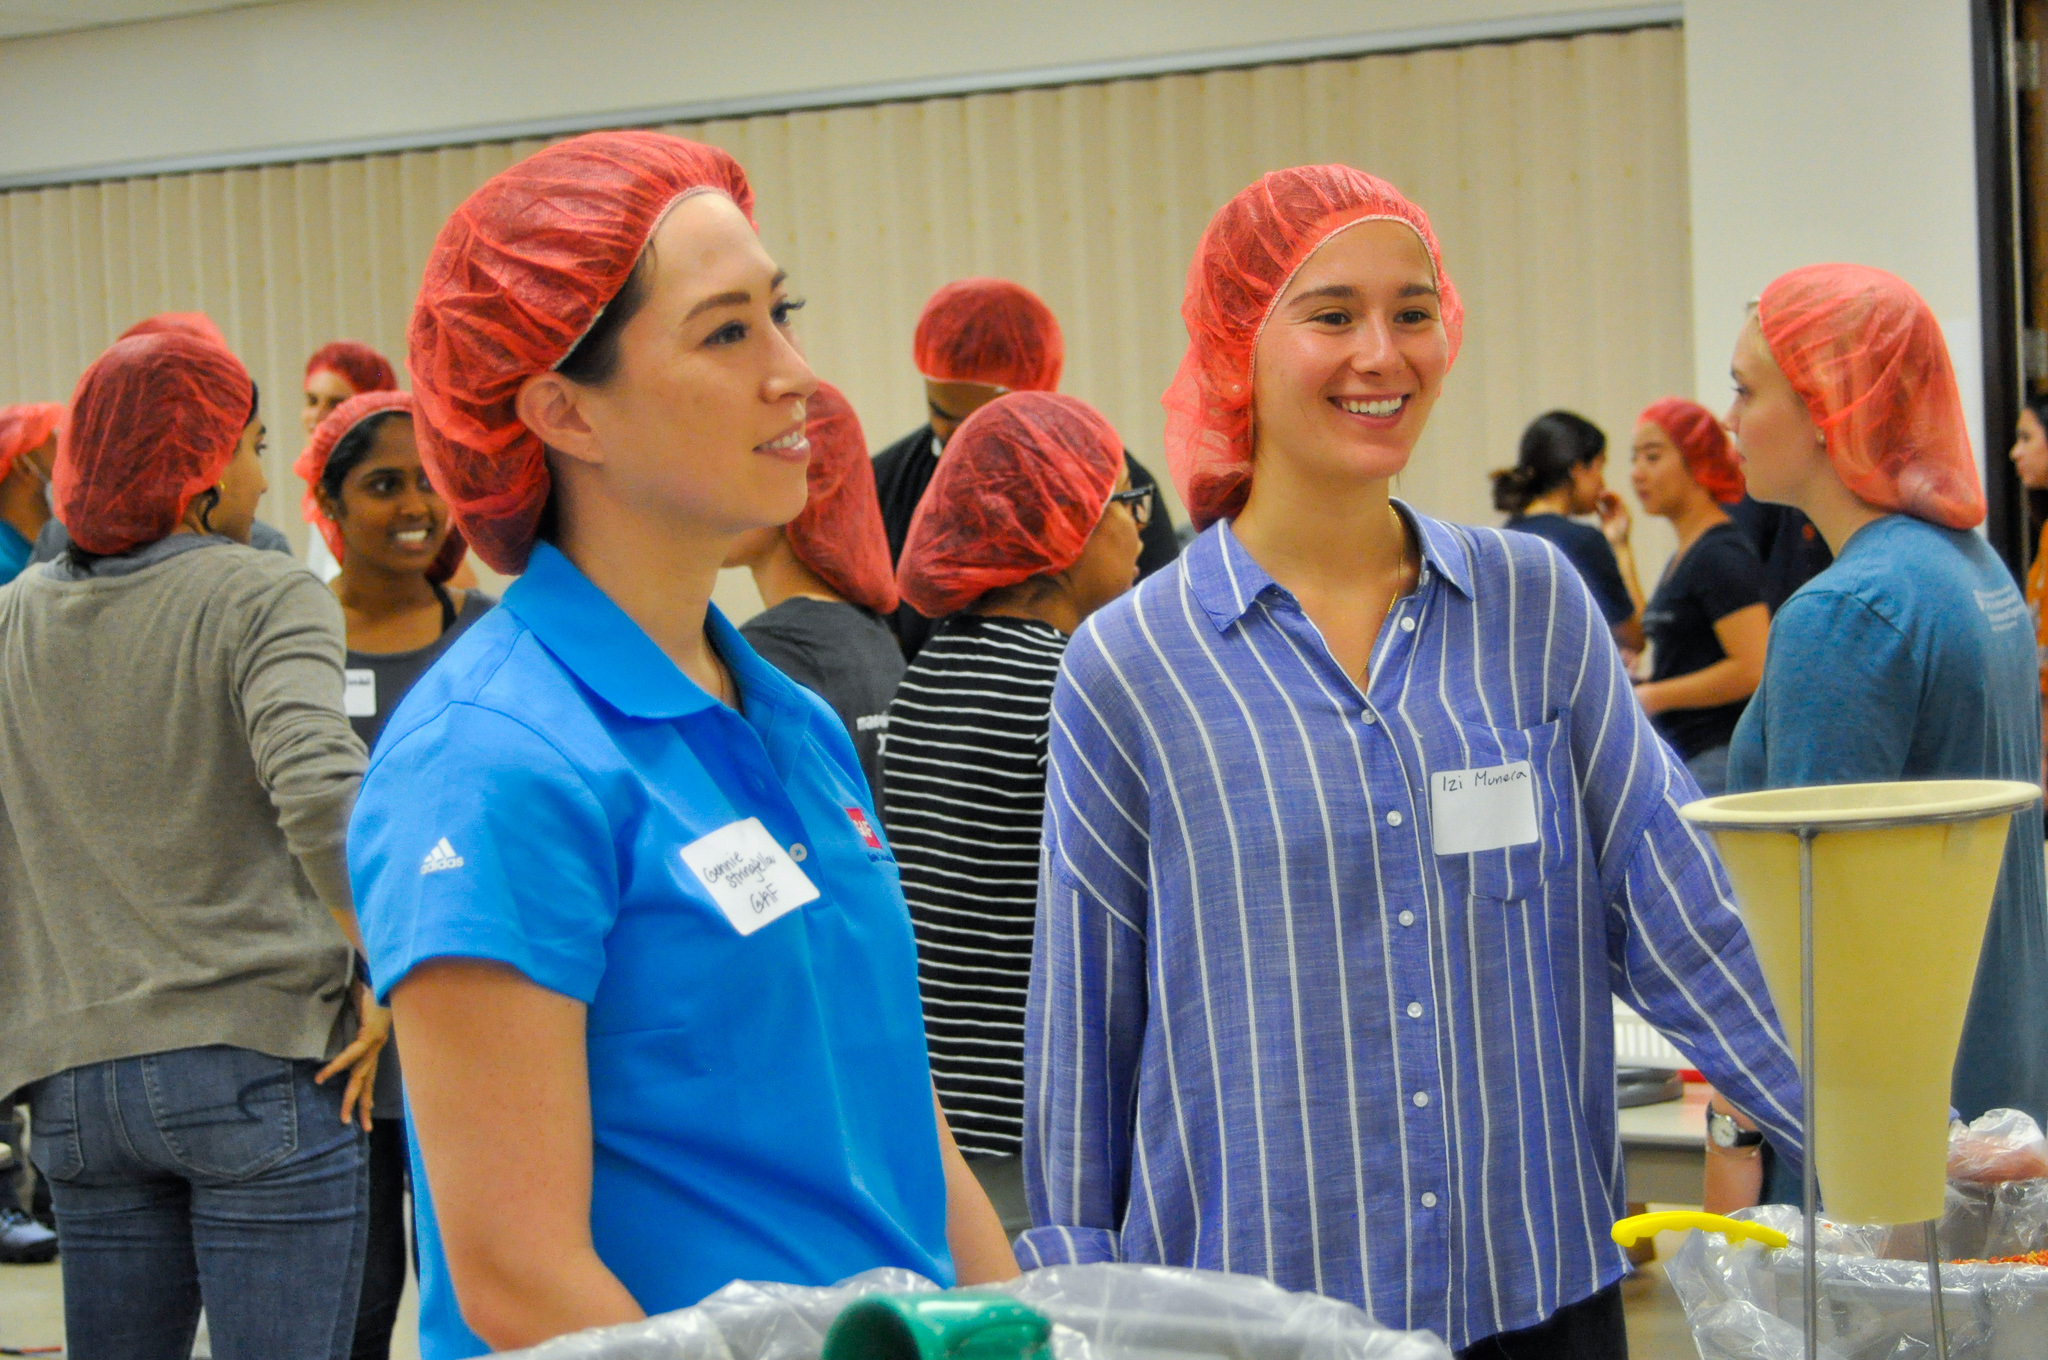 Recruiter and student smiling while volunteering